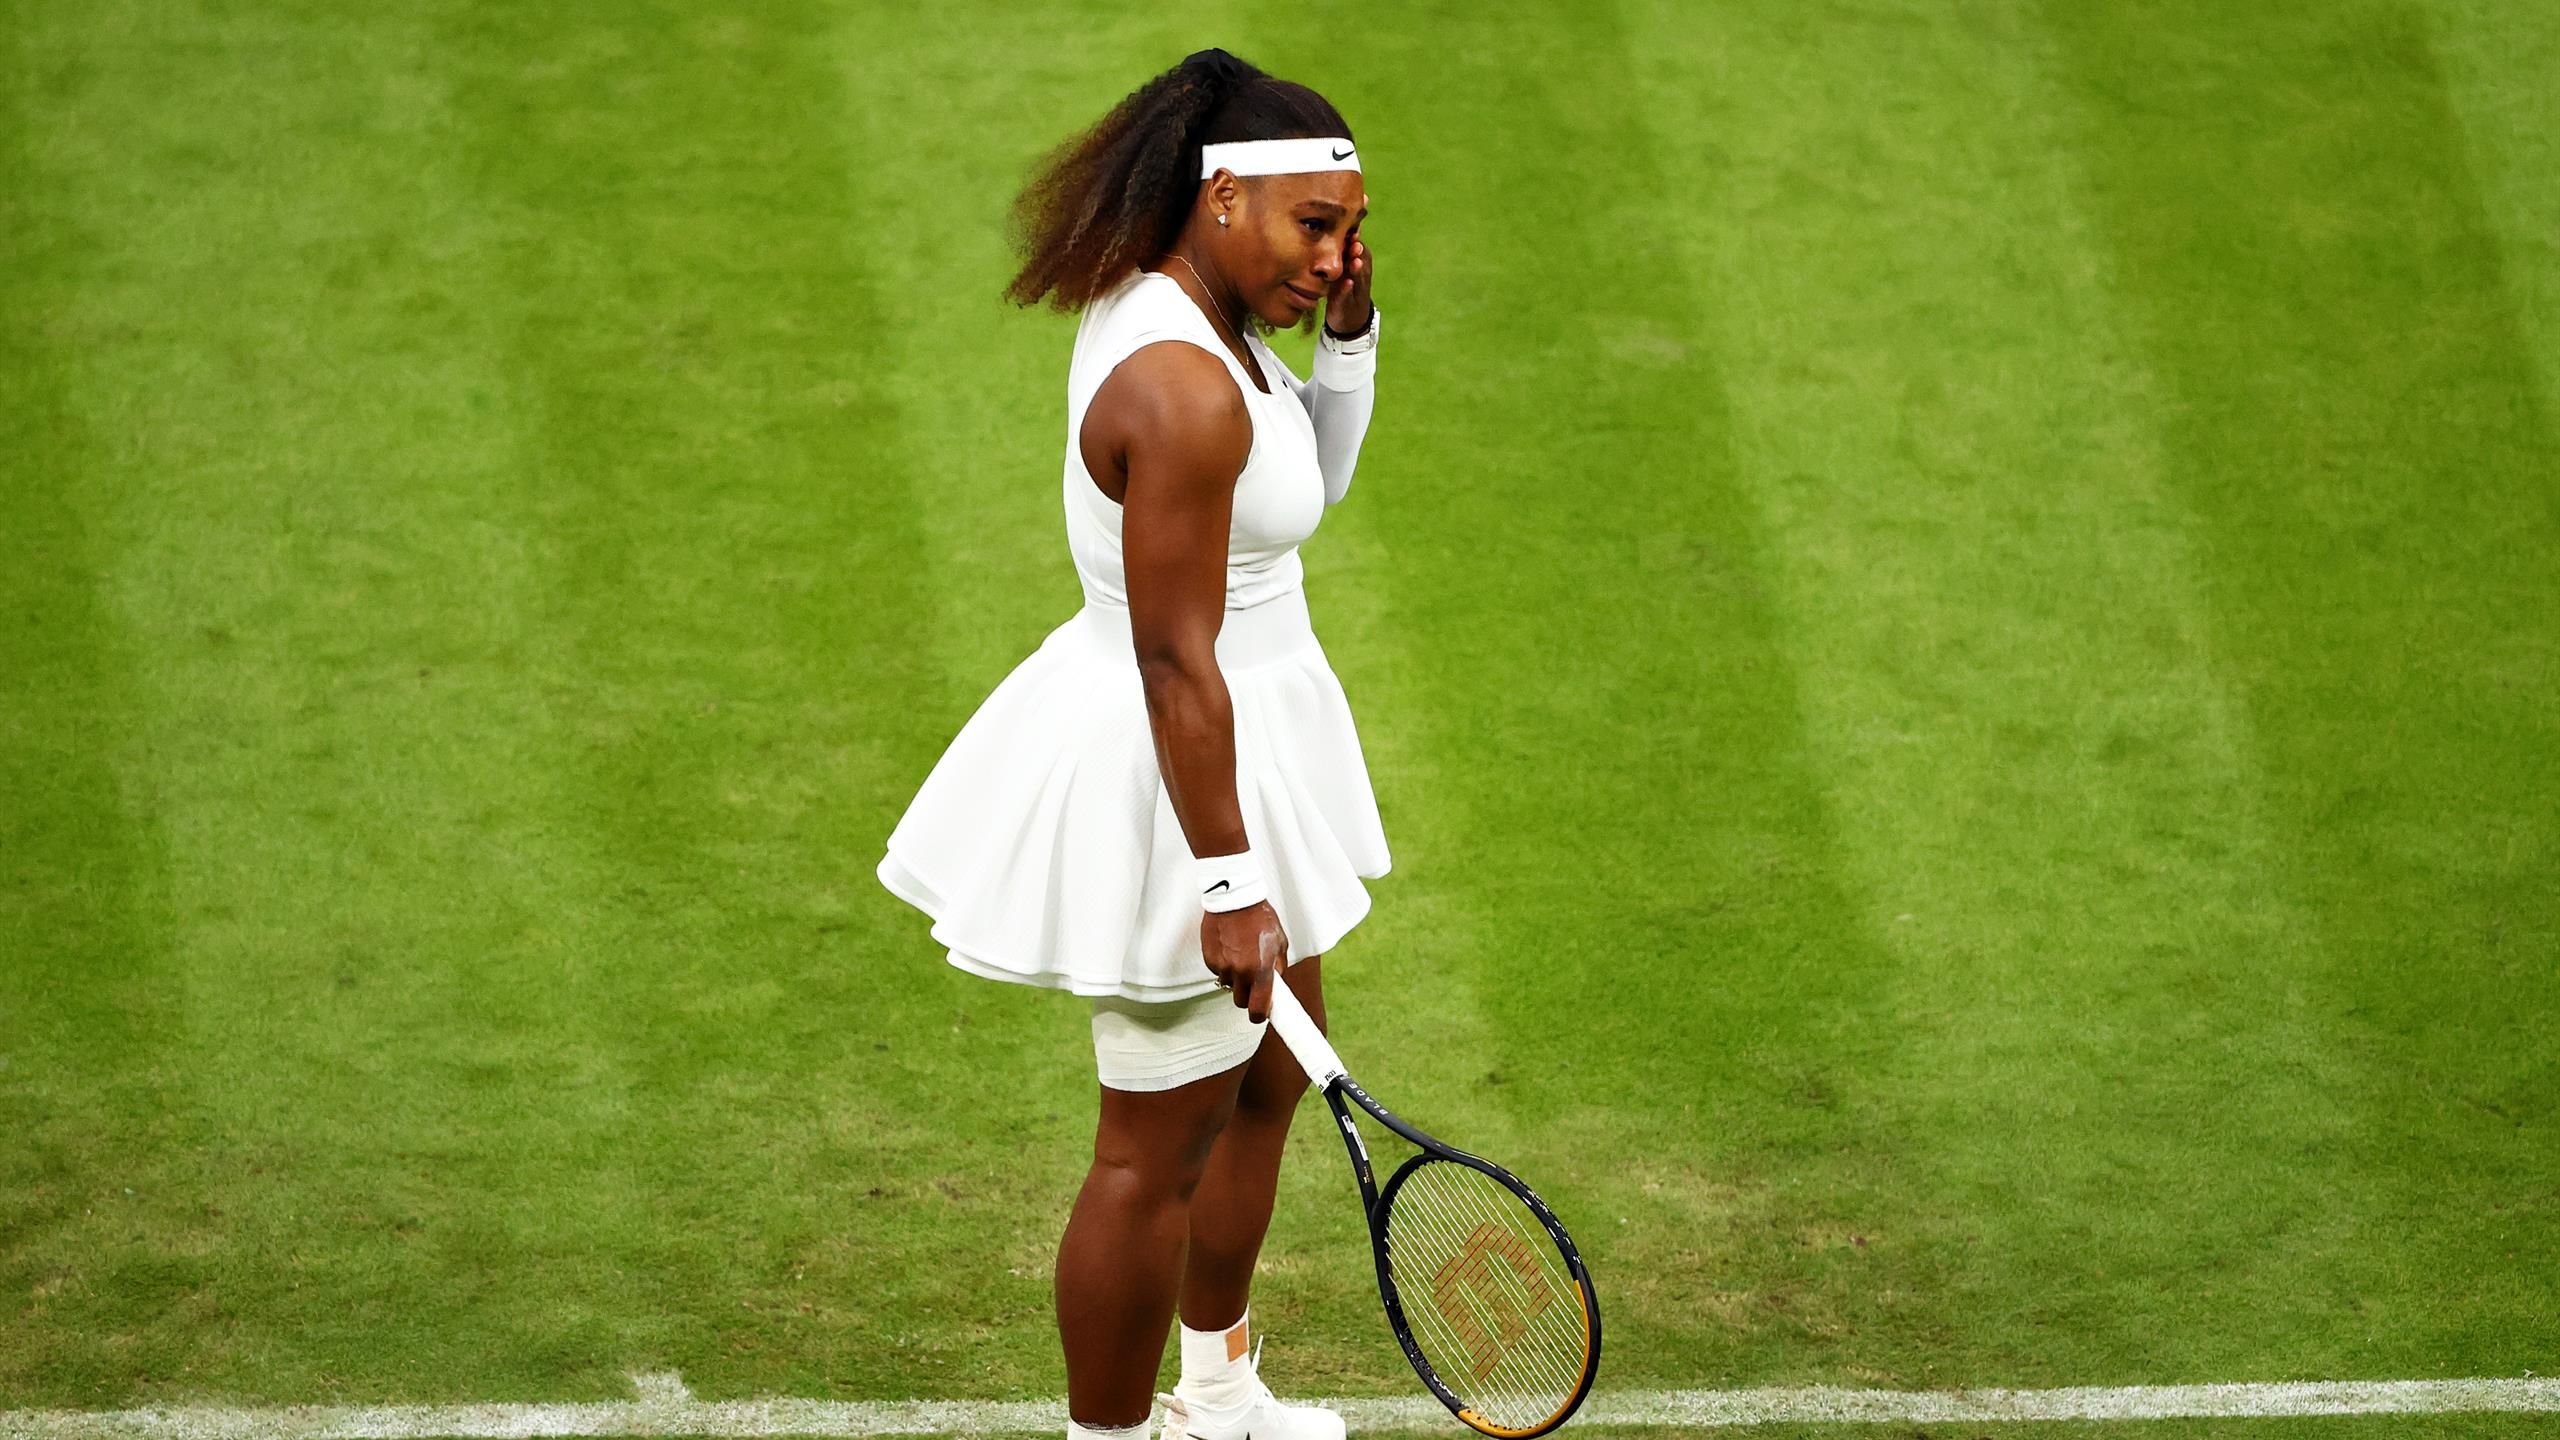 Wimbledon 2021 tennis - Tearful Serena Williams forced to retire with ankle injury against Aliaksandra Sasnovich